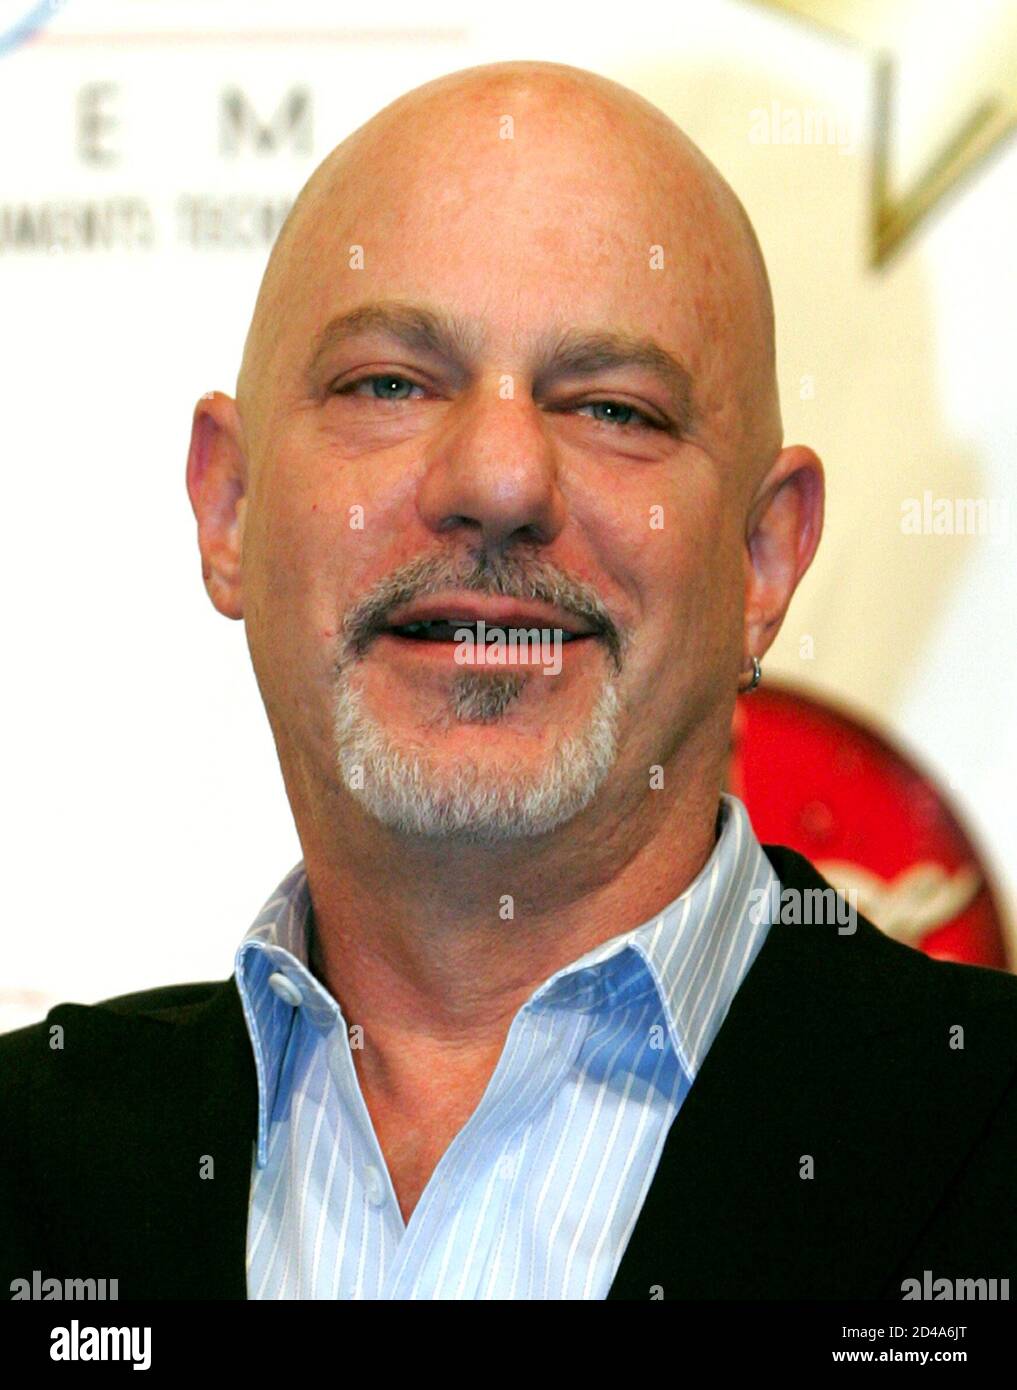 Director Rob Cohen arrives at the Paris Las Vegas hotel during ShoWest, the official convention of the National Association of Theatre Owners, March 17, 2005, in Las Vegas, Nevada. Cohen won the Director of the Year award. Stock Photo